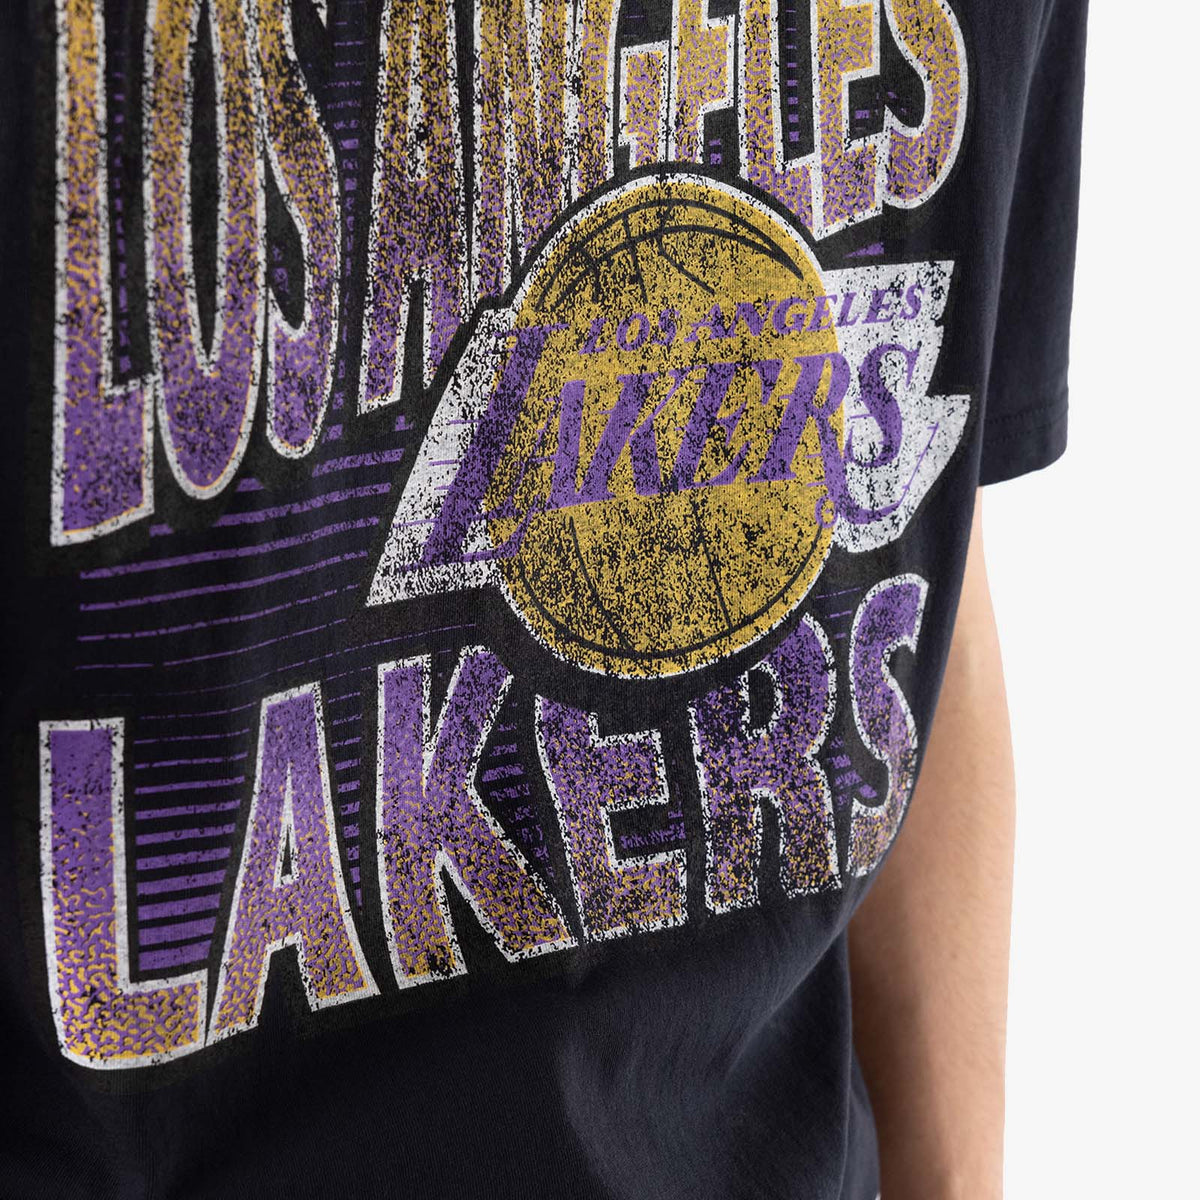 qt Trendy Los Angeles Lakers Incline Stack Vintage Tee - Faded Black/Unisex Tee/3XL